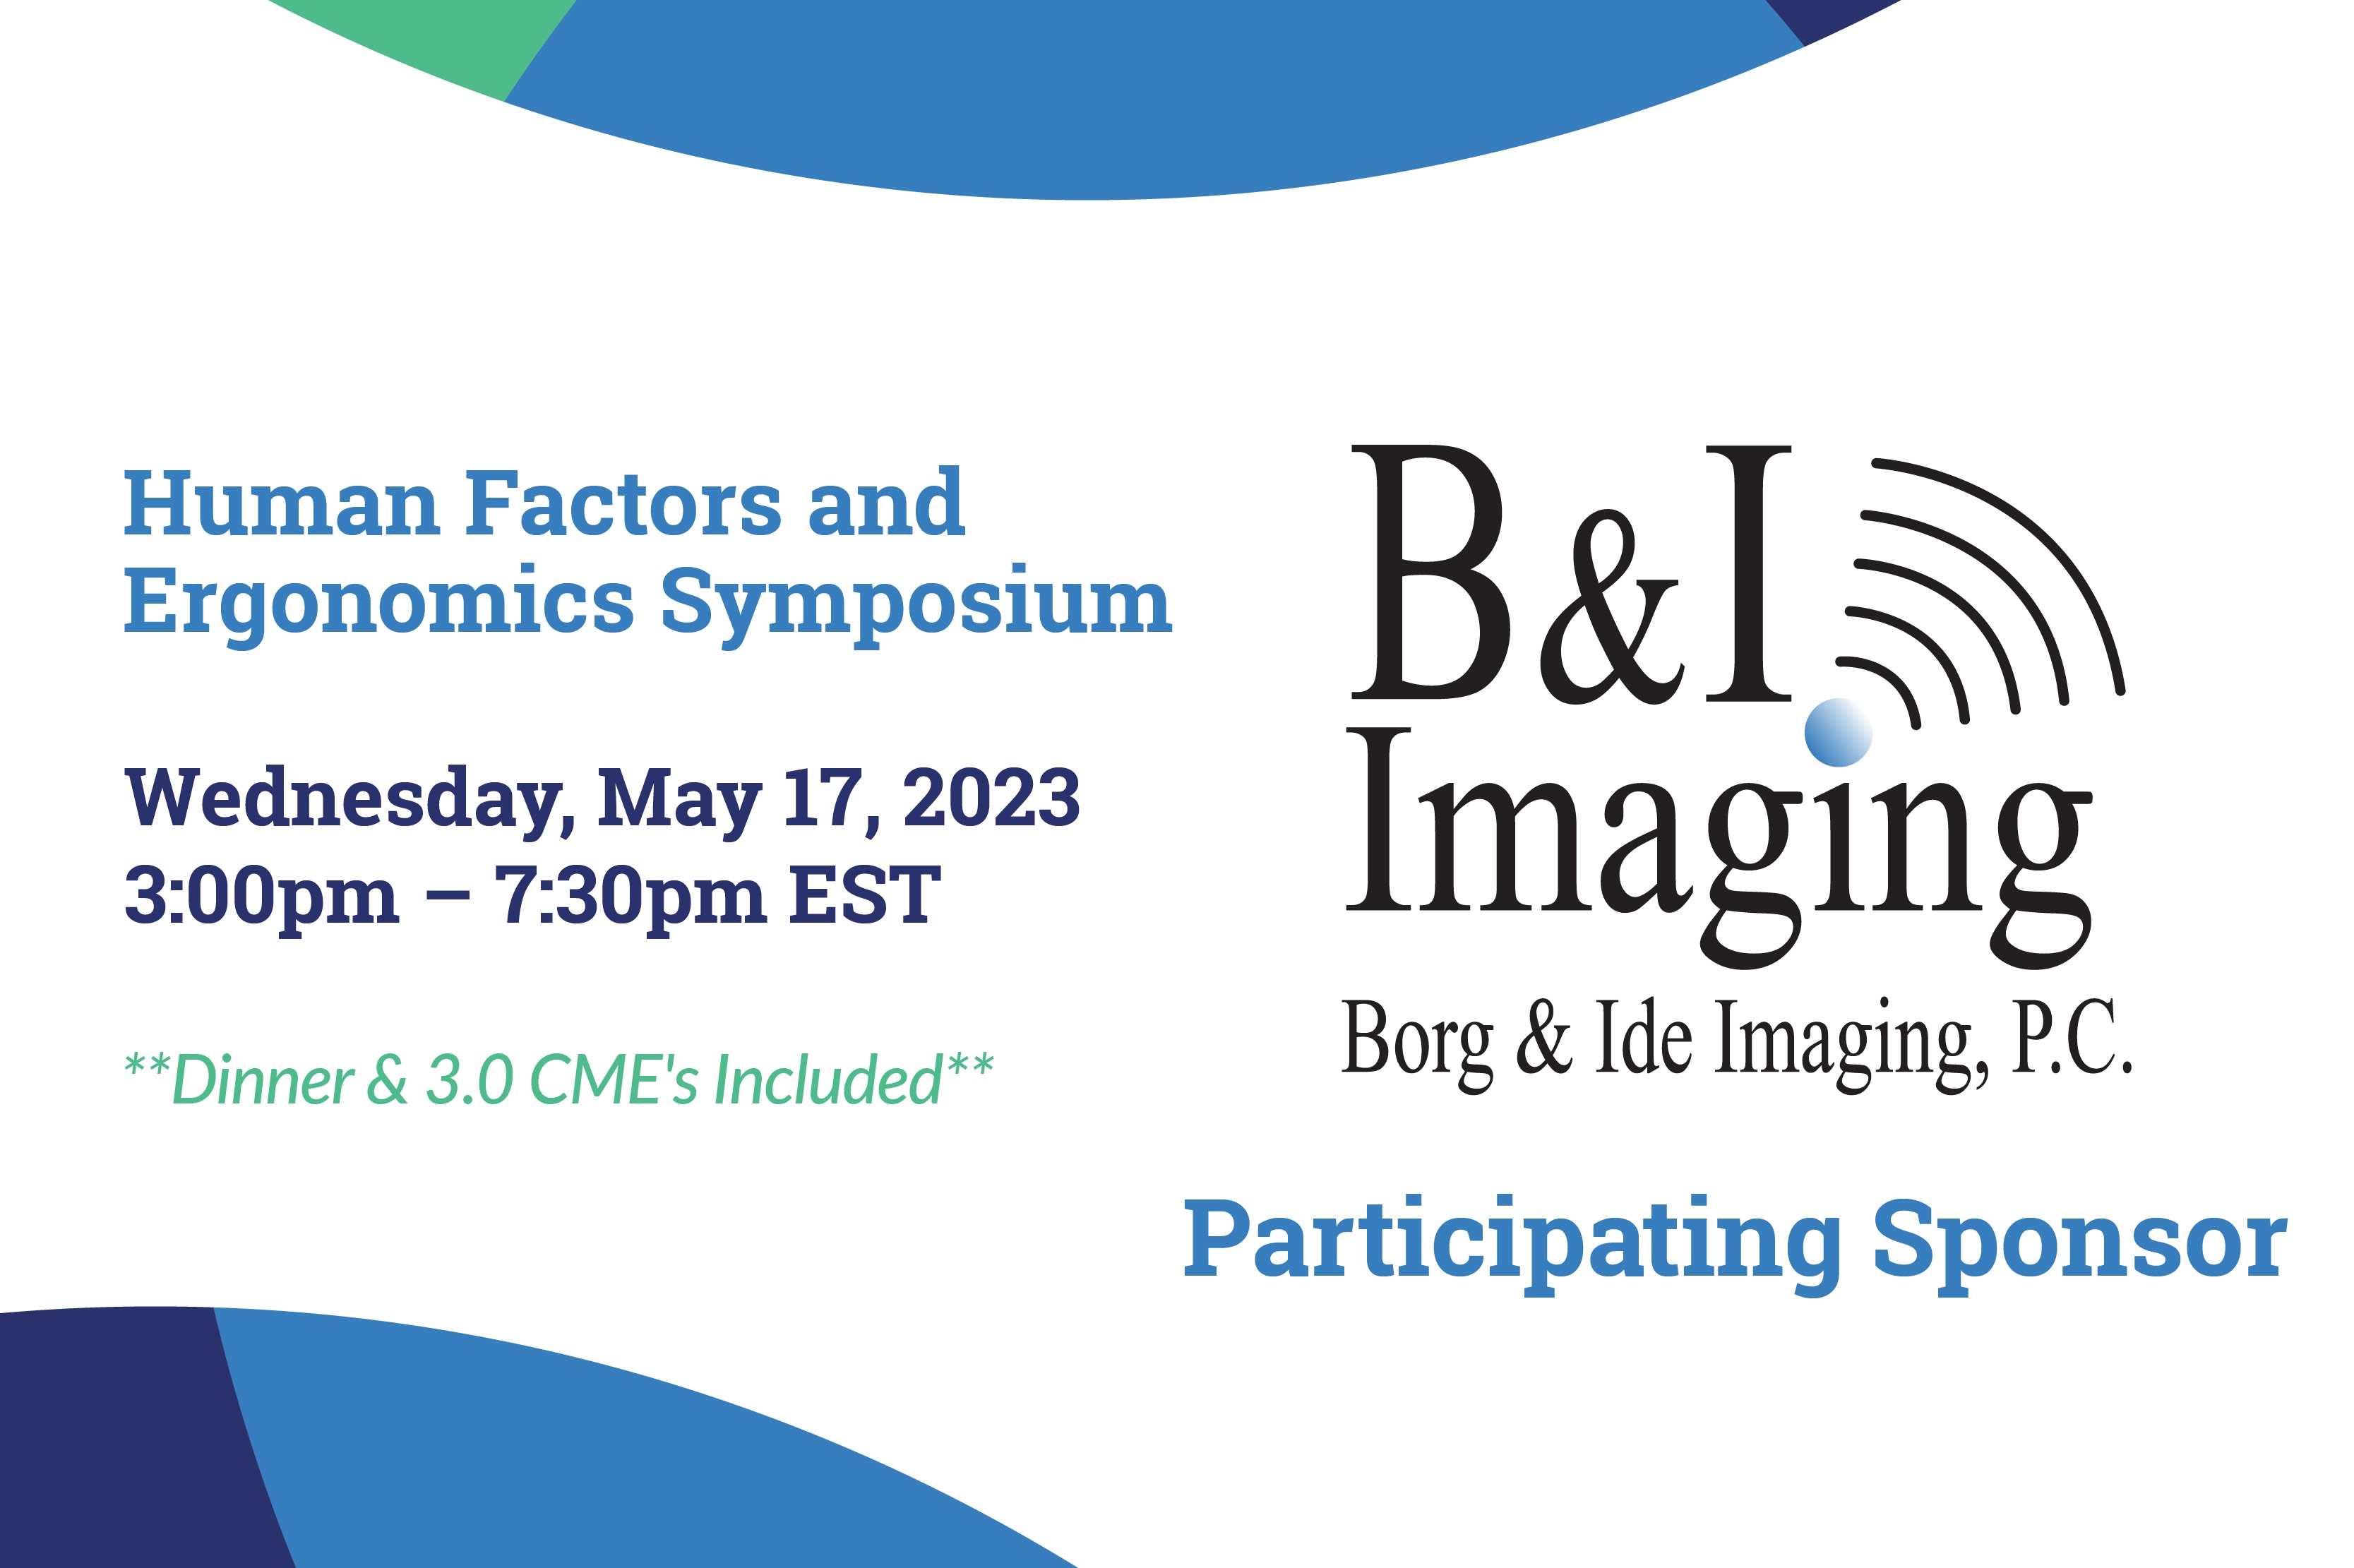 Stop by our table to learn more about Borg and Ide Imaging